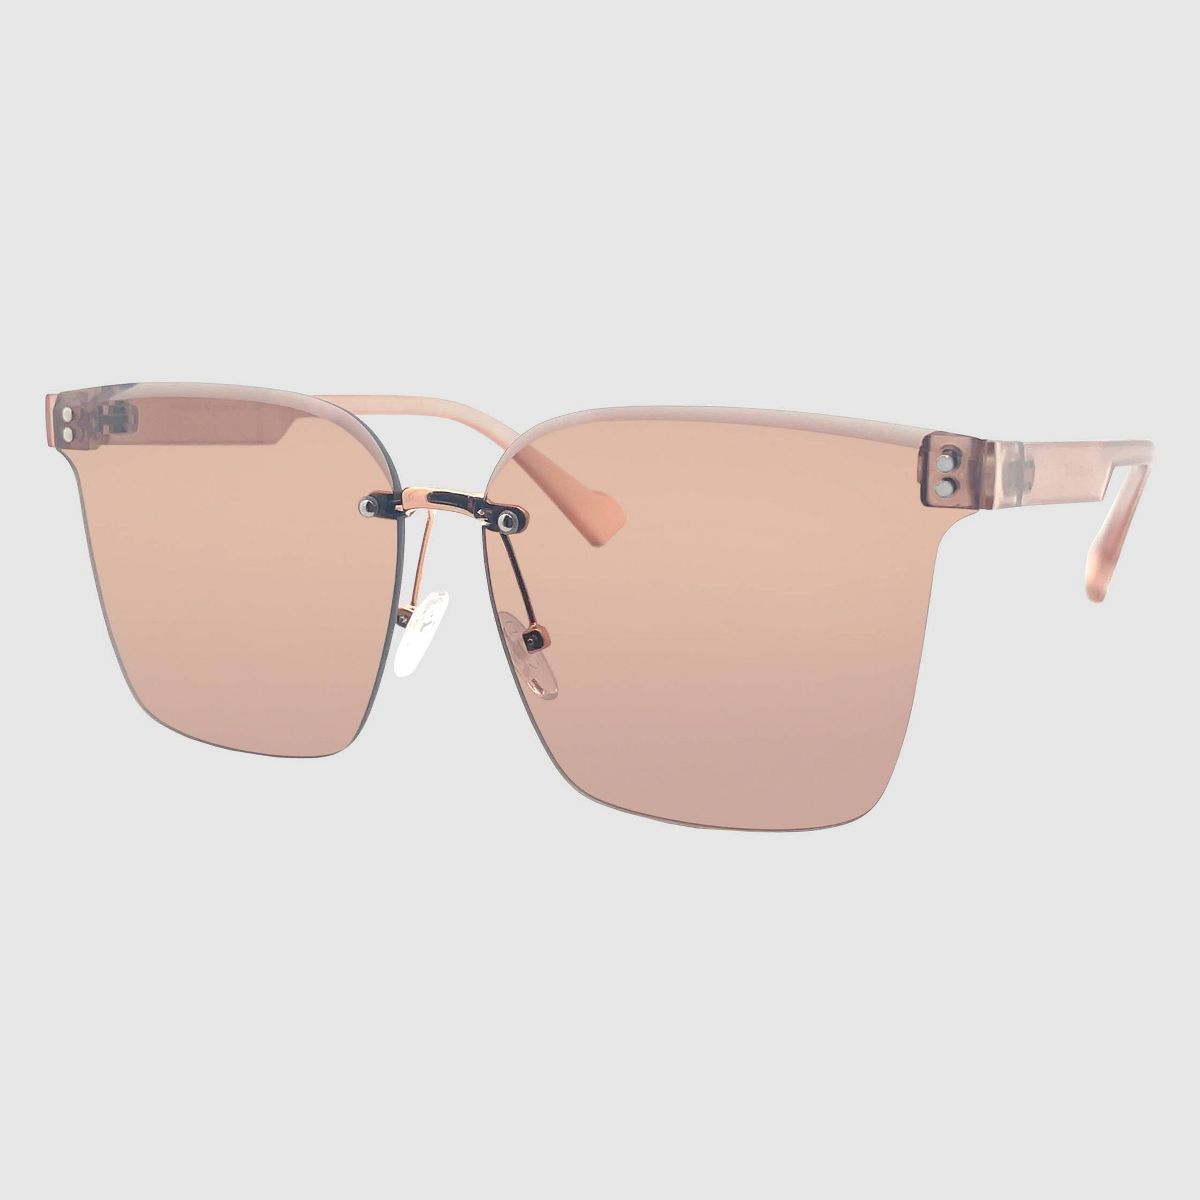 Rimless Square Matte Arm Sunglasses - Wild Fable™ Brown | Target